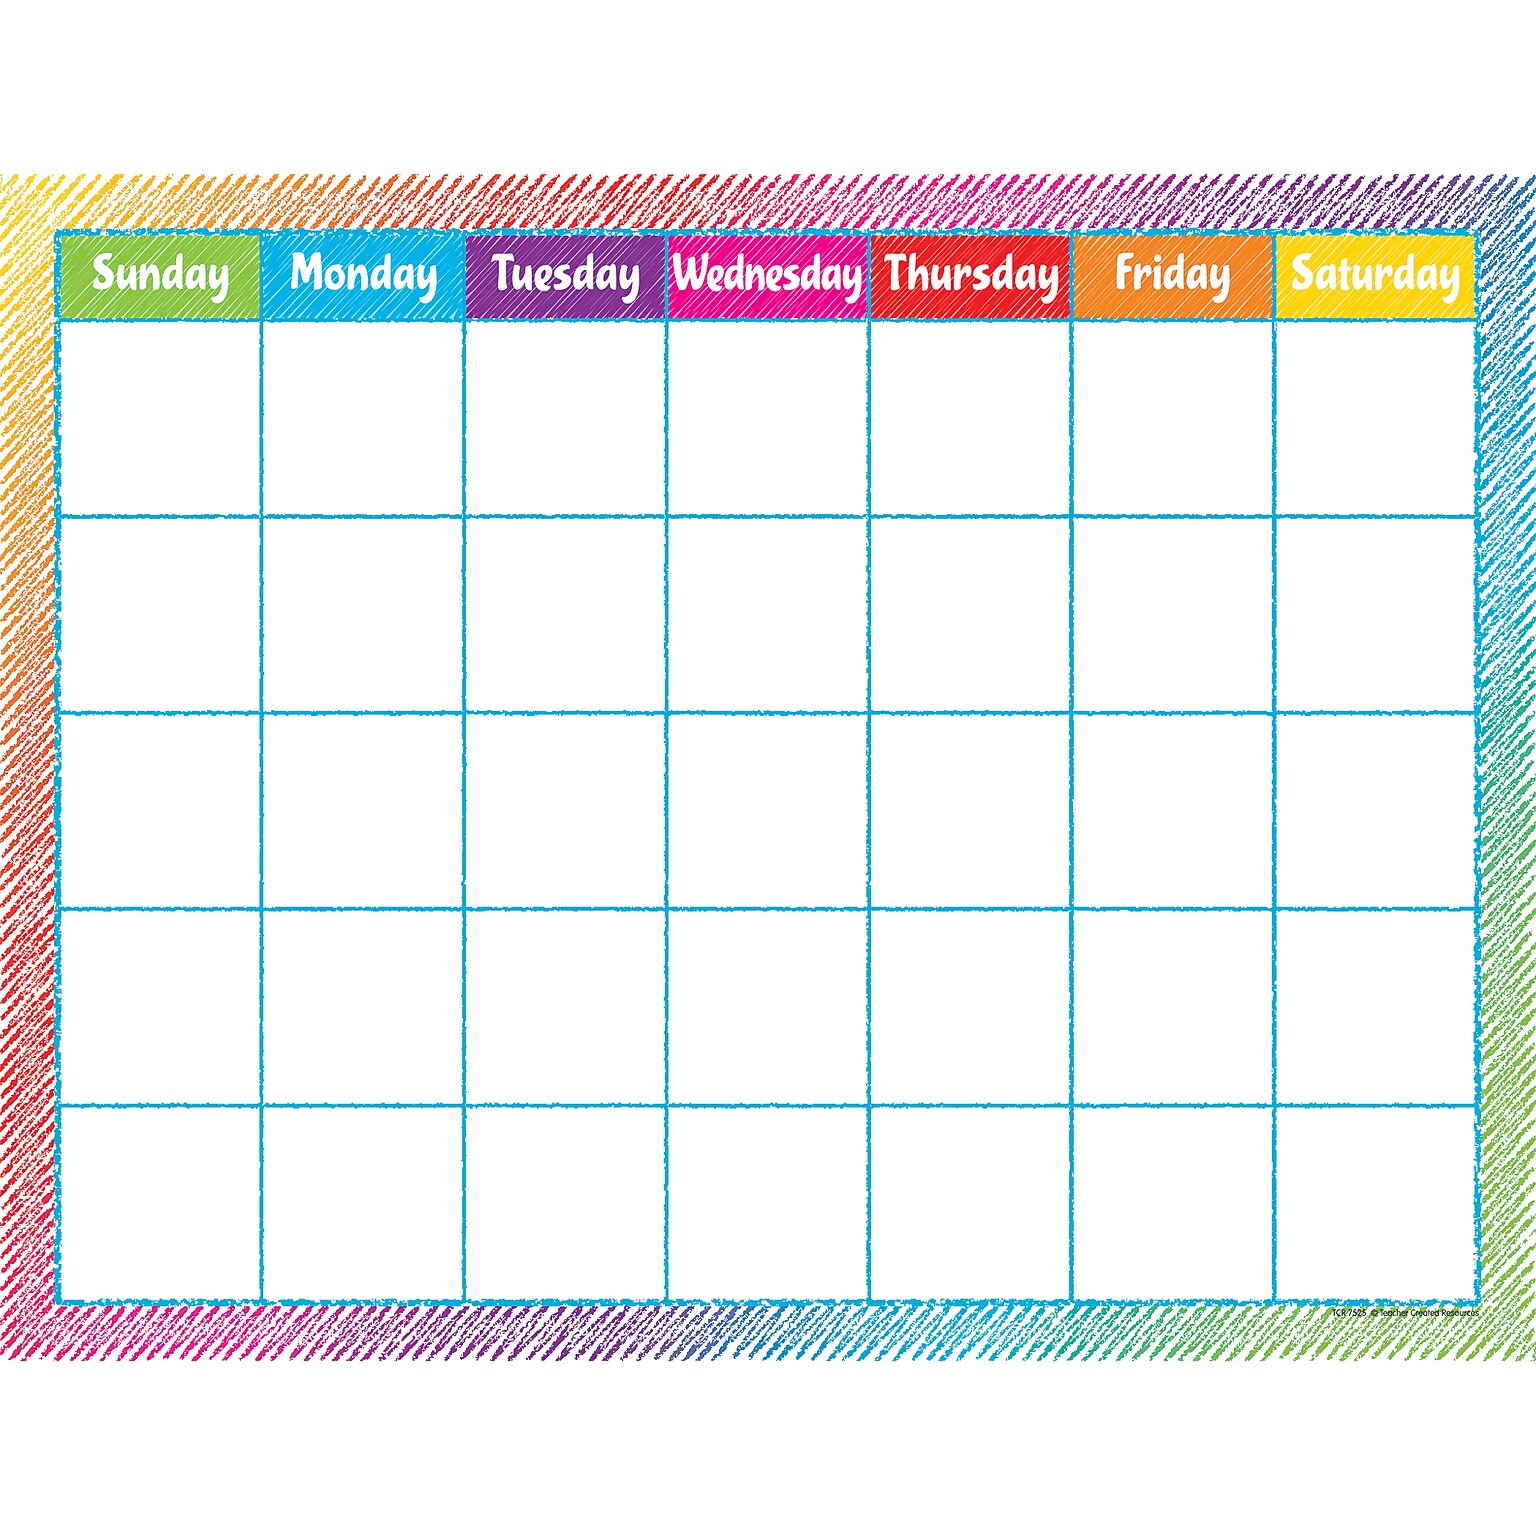 Teacher Created Resources Colorful Scribble Calendar Chart (TCR7525)